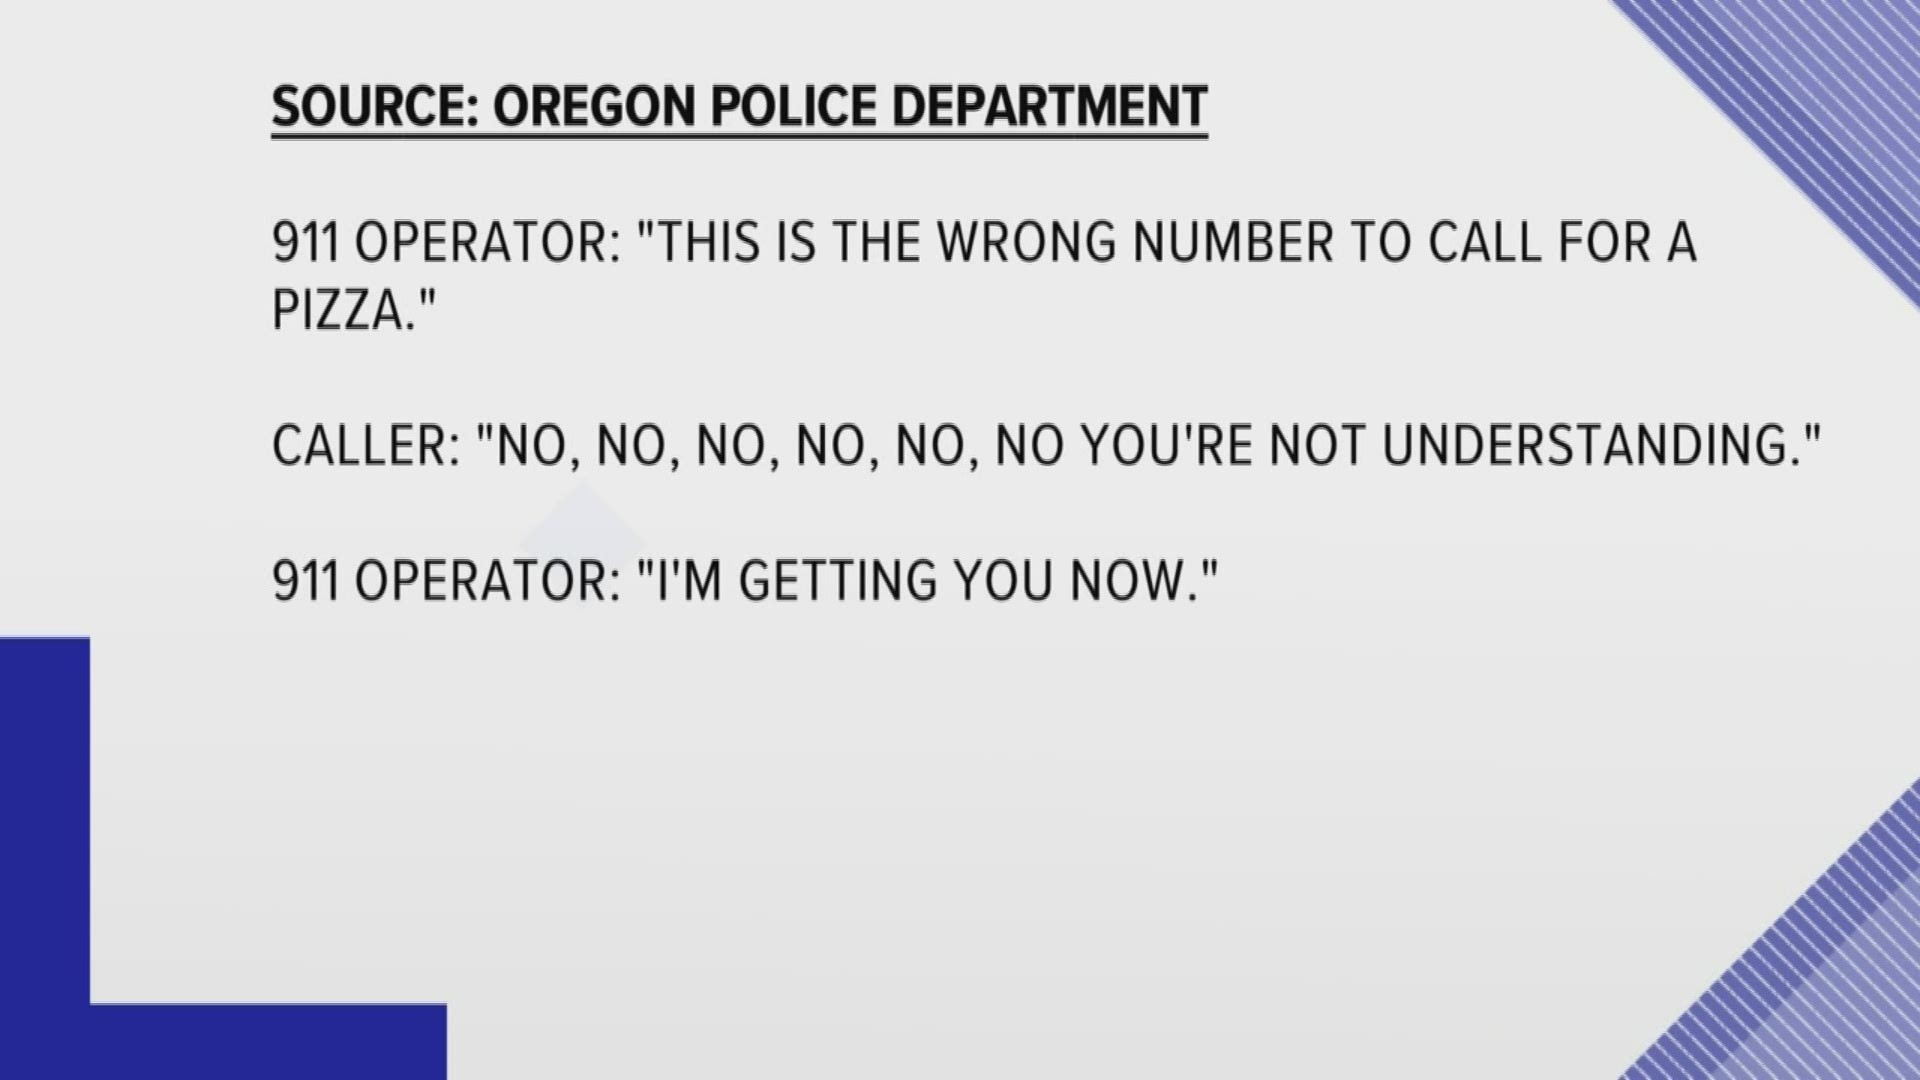 Police credit the quick thinking of the dispatcher who took the call that lead to the arrest of the suspect.